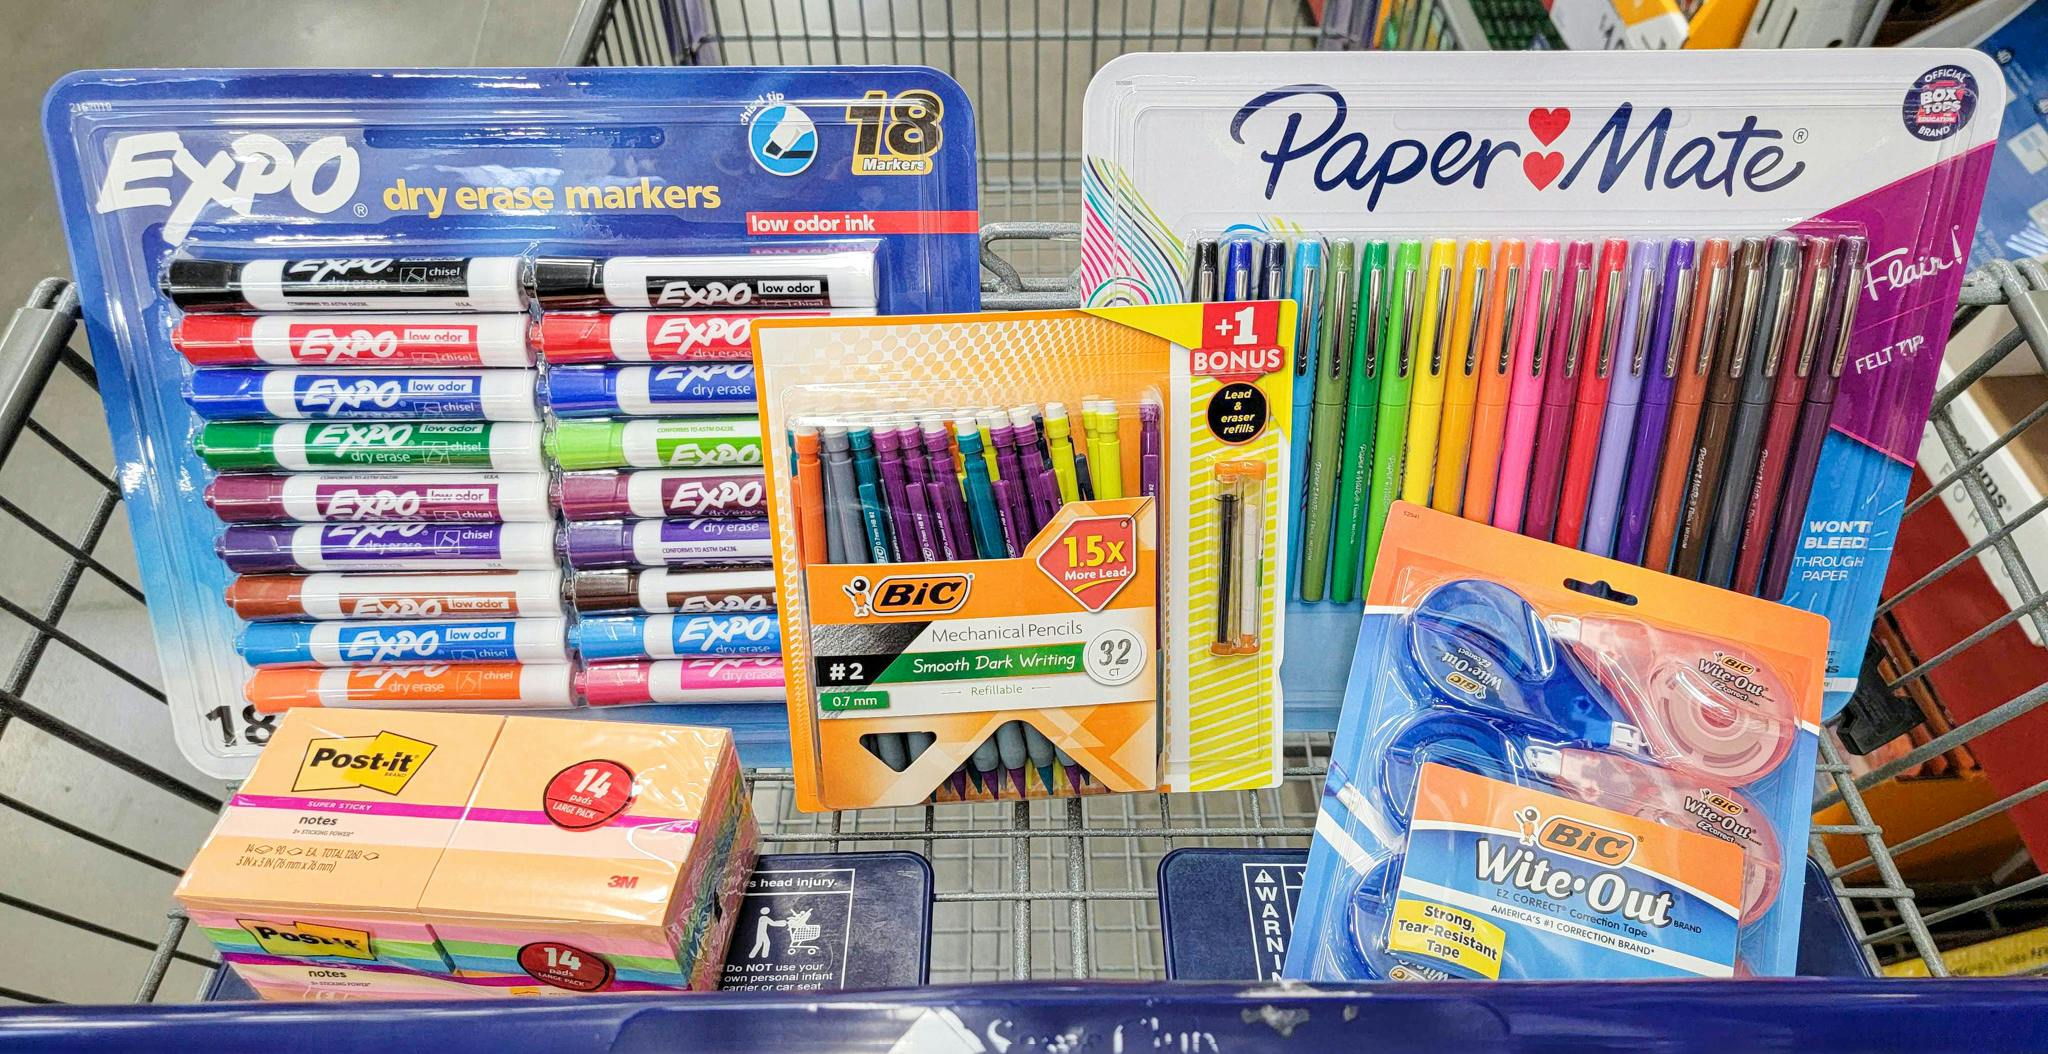 CLAIRE'S HAUL : Shop Back to School Supplies, Stationery, Mini